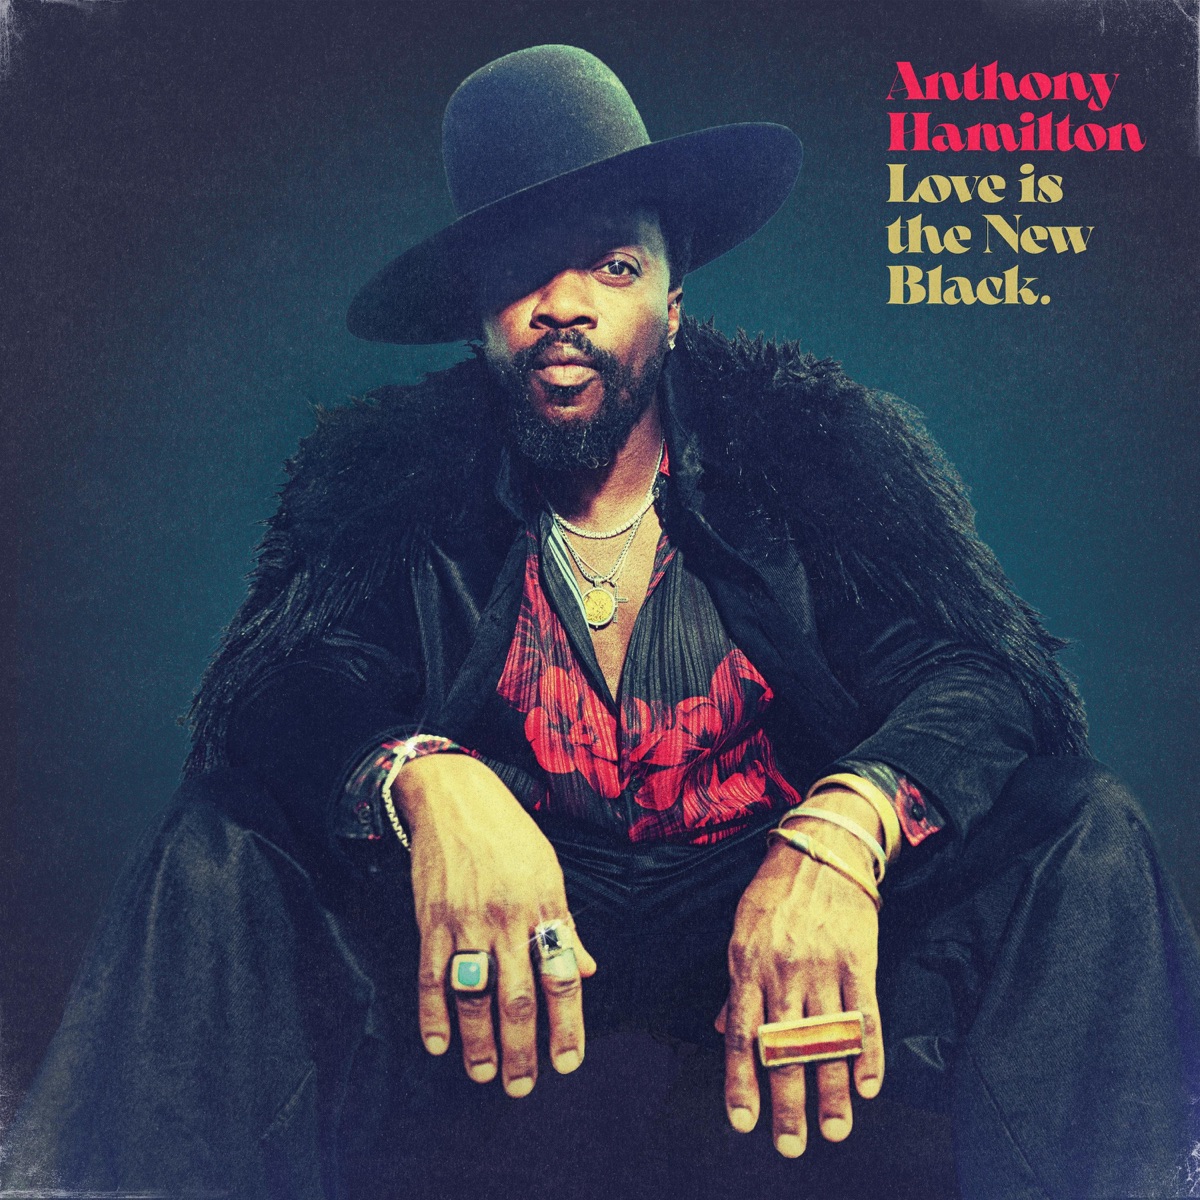 Comin' From Where I'm From - Album by Anthony Hamilton